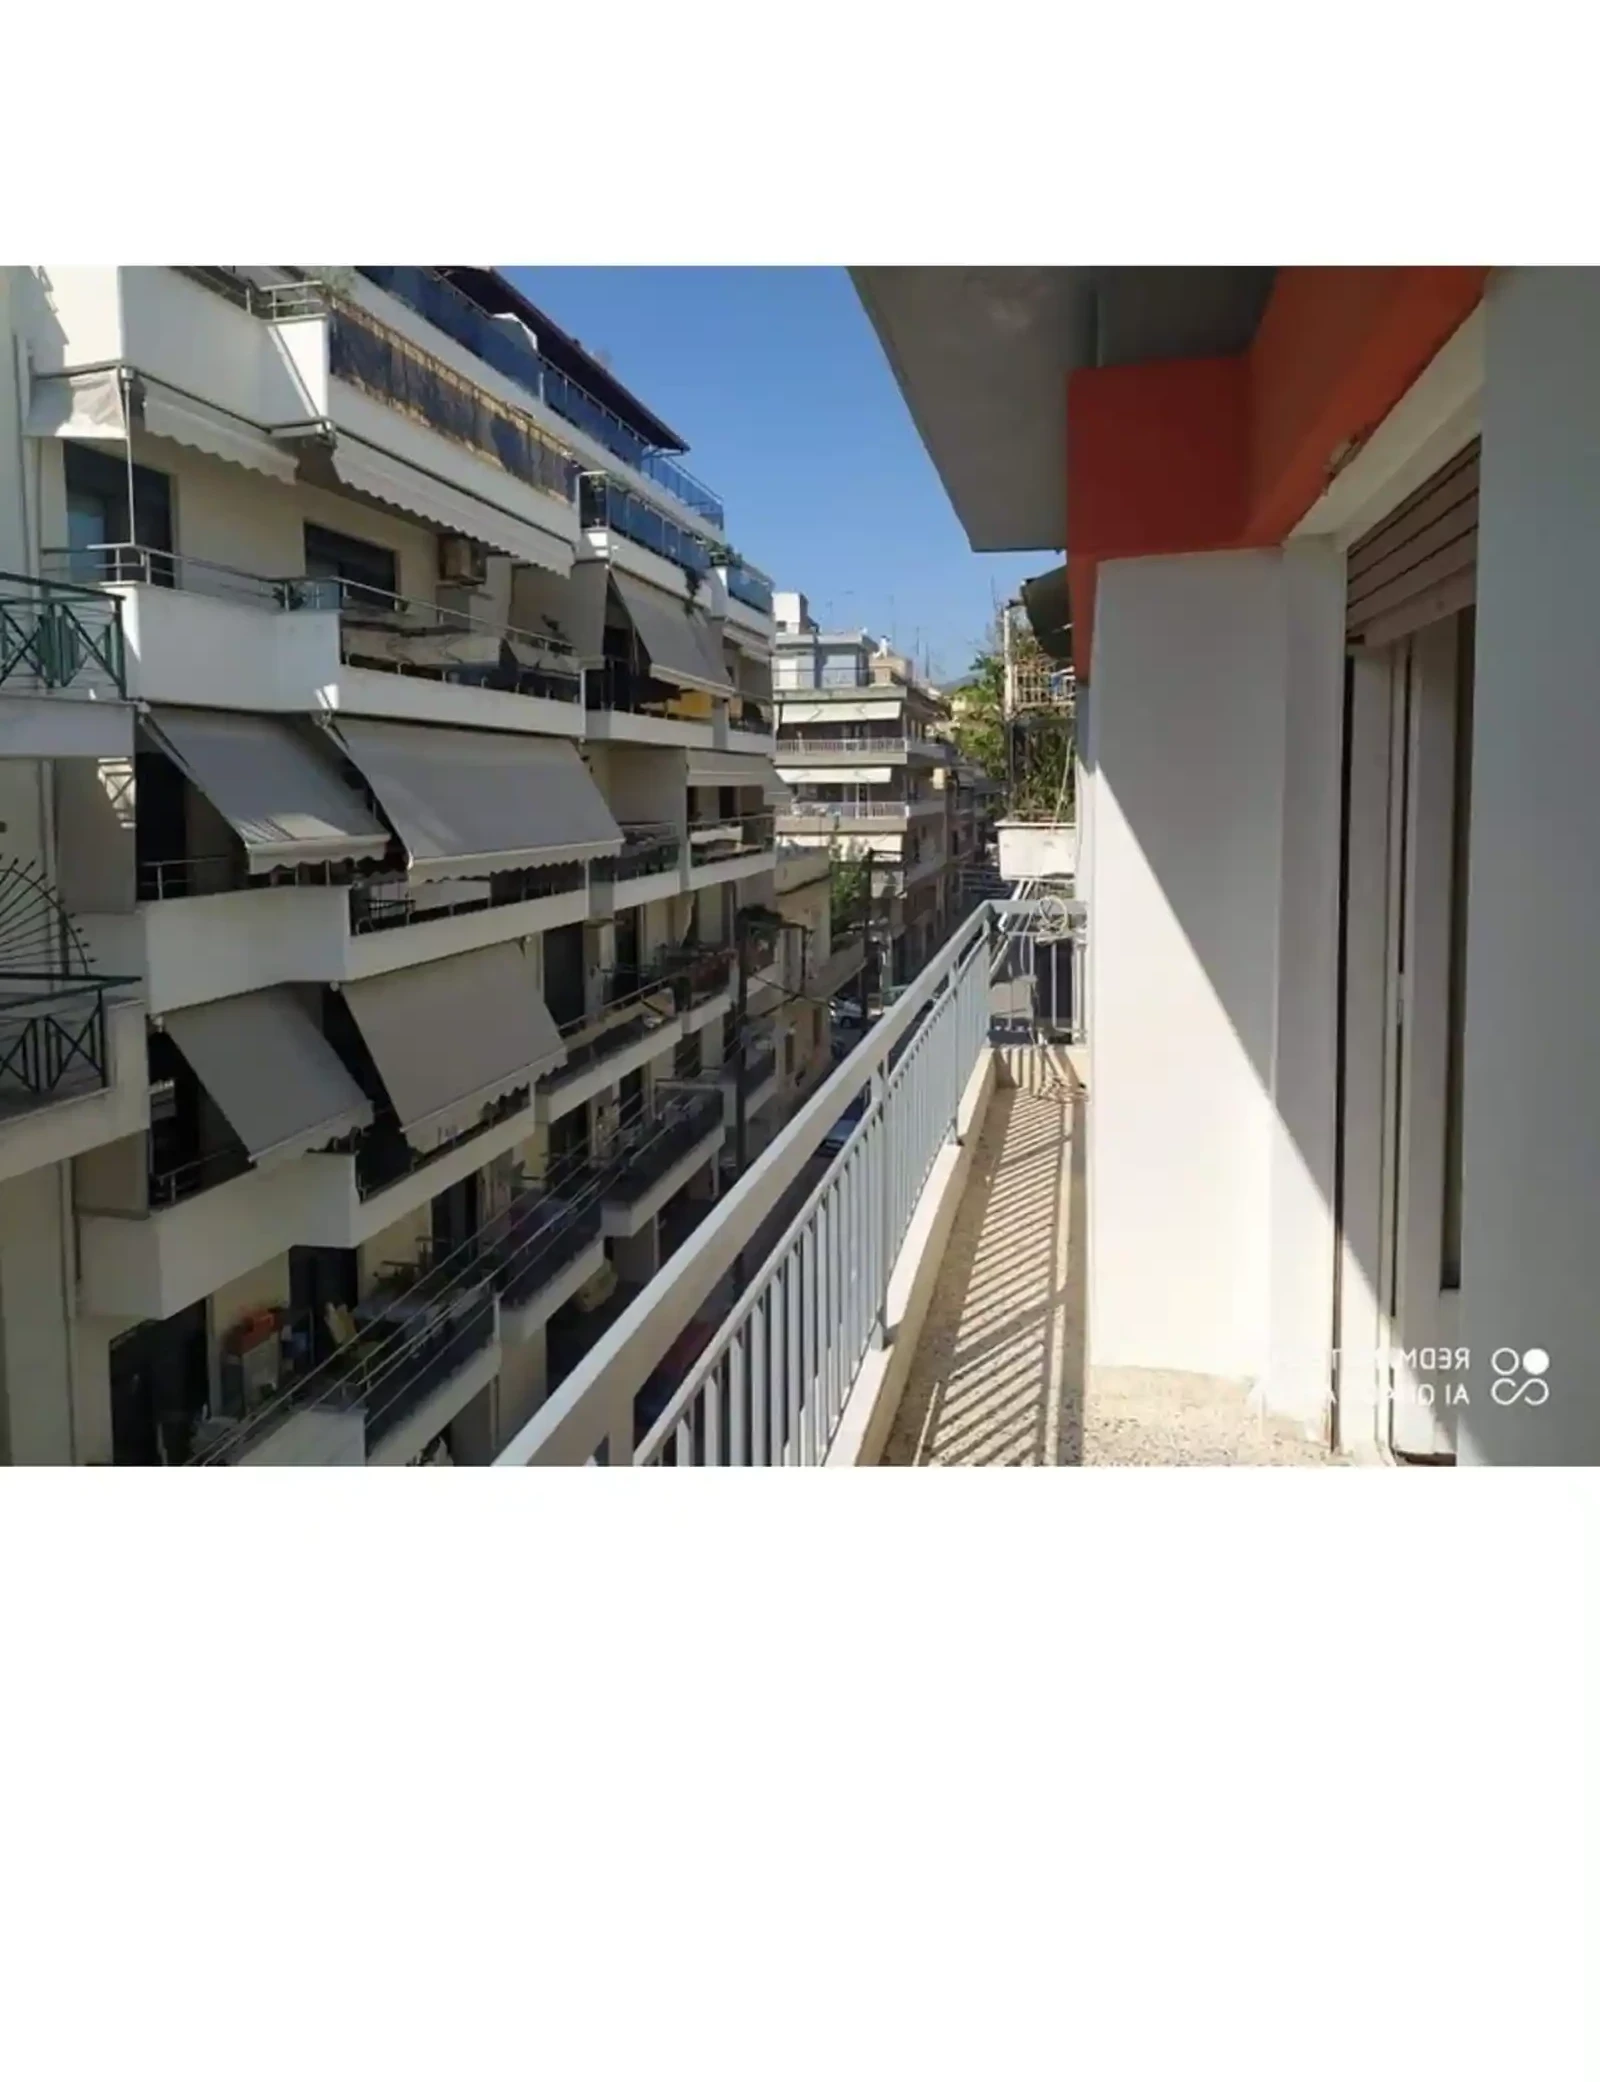 1-bedroom apartment fоr sаle €93.000, image 1